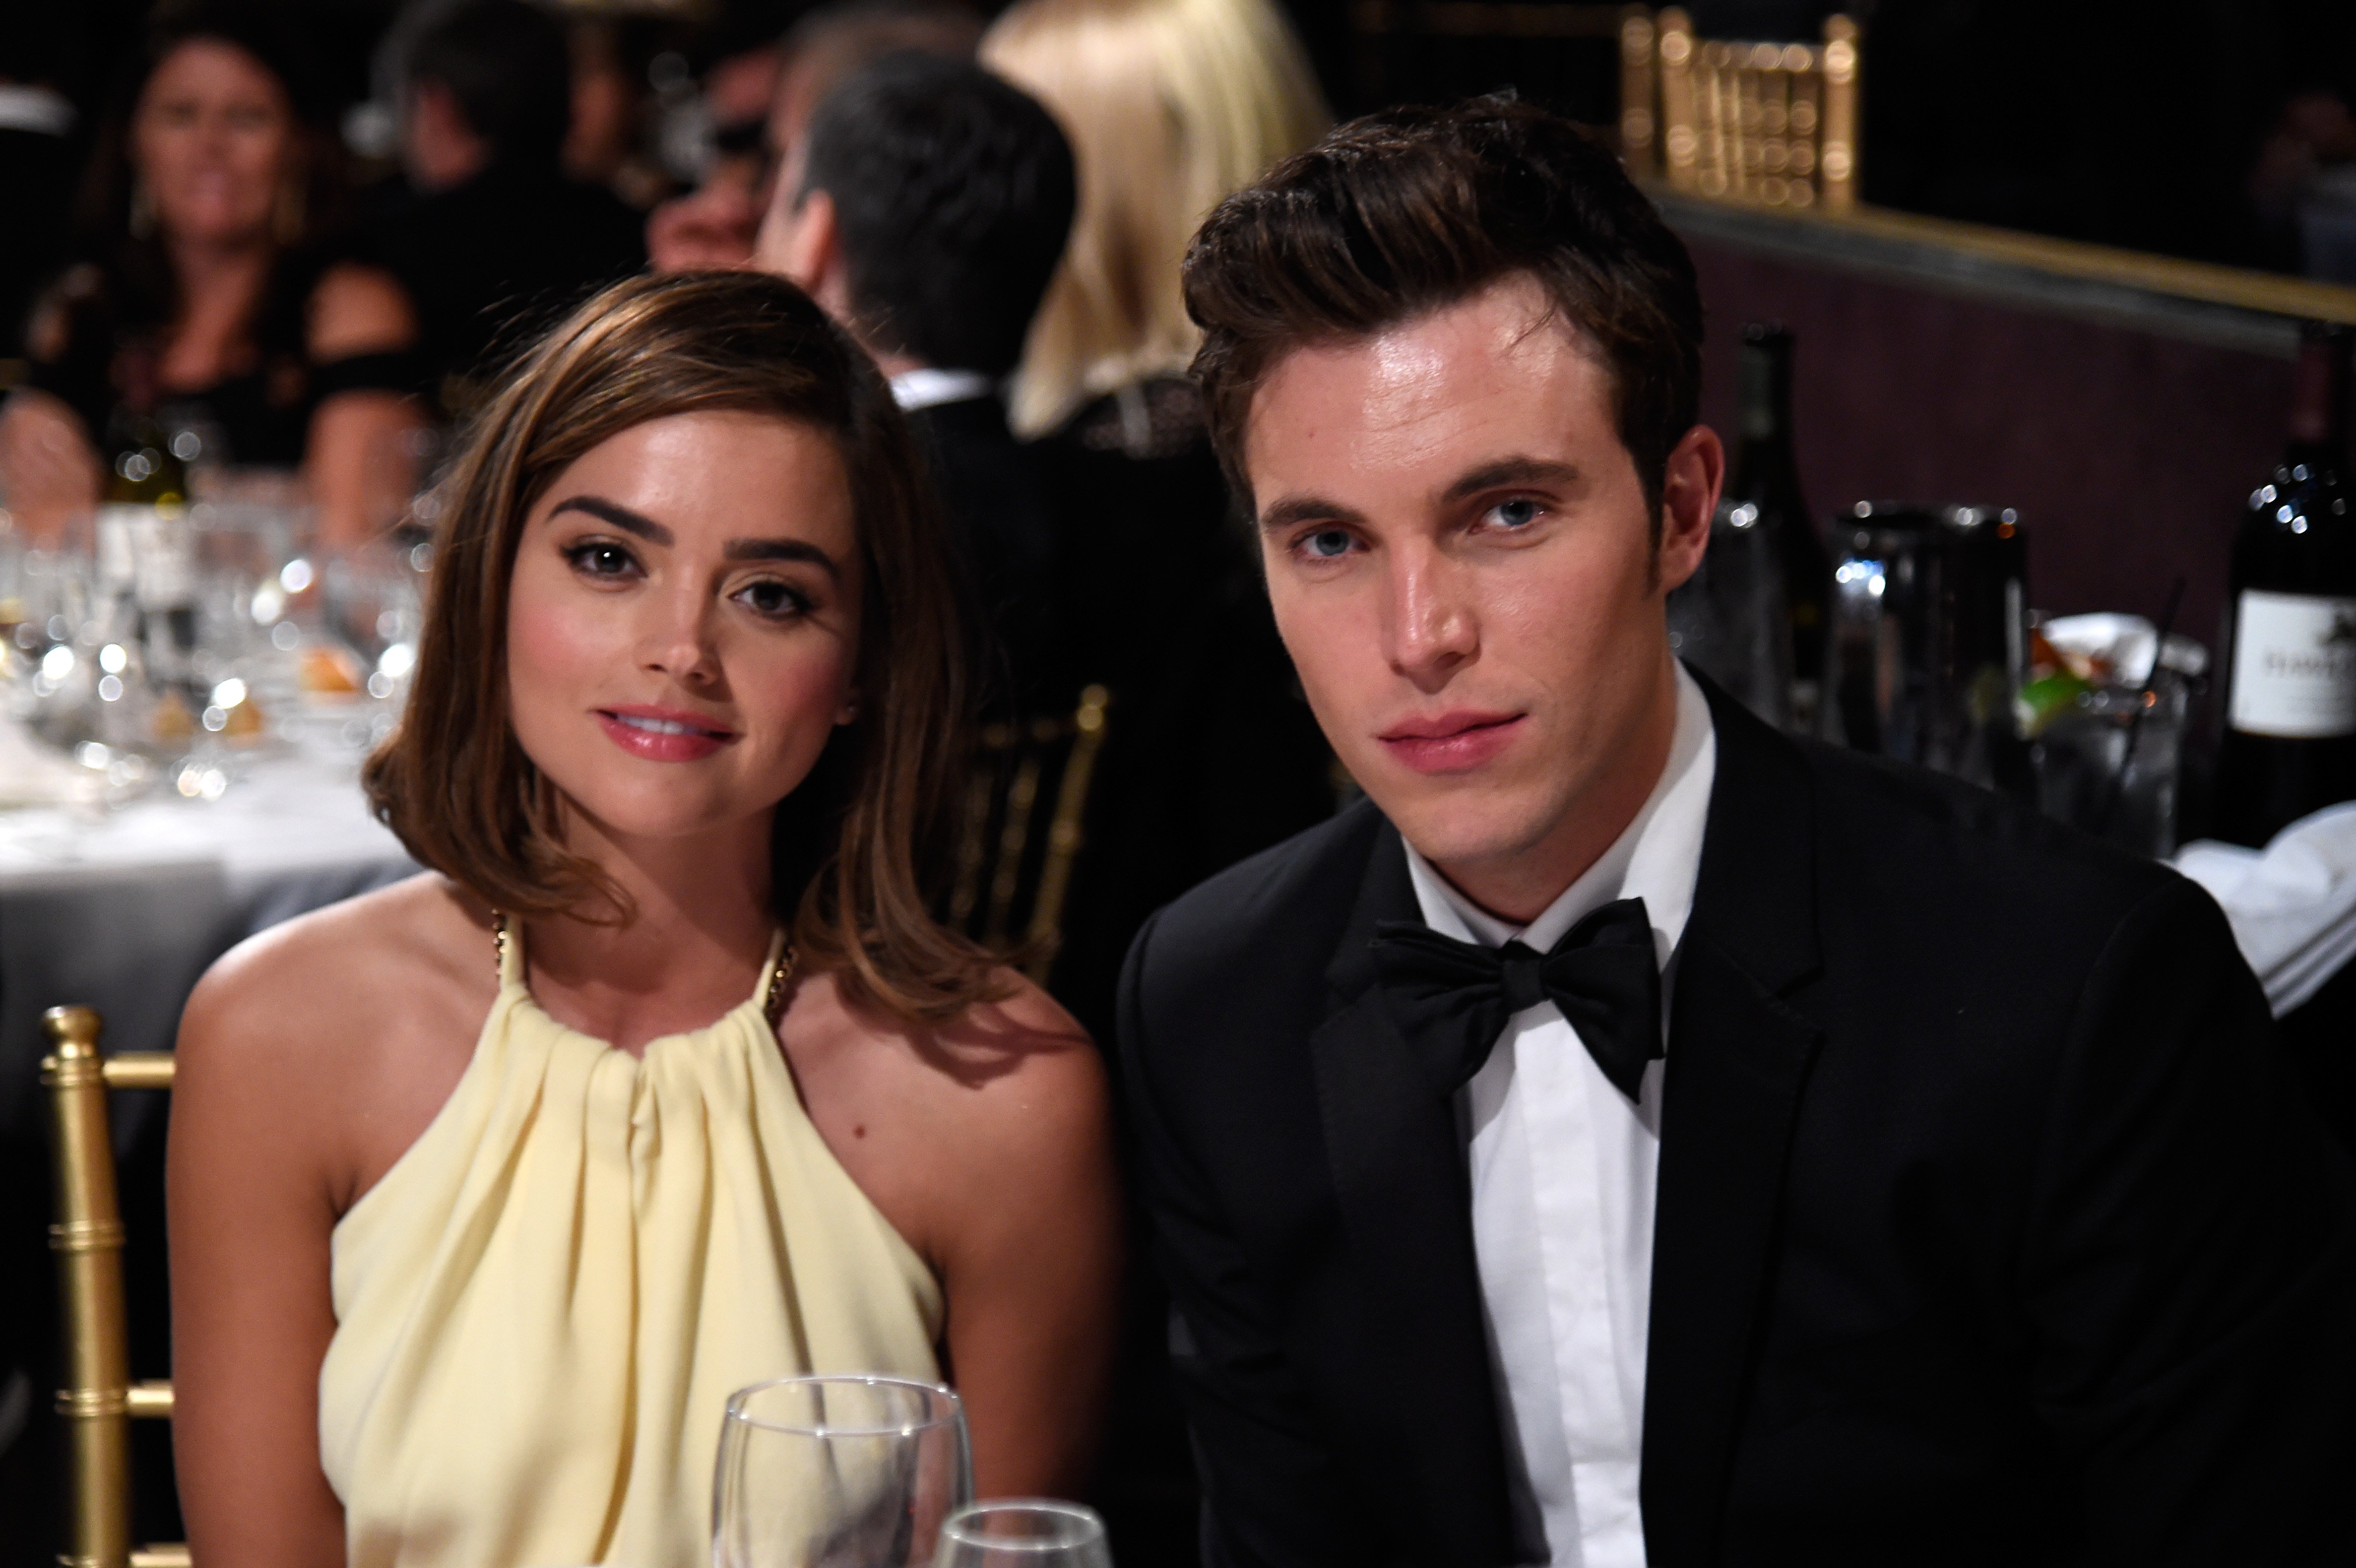 Jenna Coleman and actor Tom Hughes at The Beverly Hilton Hotel in Beverly Hills, California on October 30, 2014 | Source: Getty Images